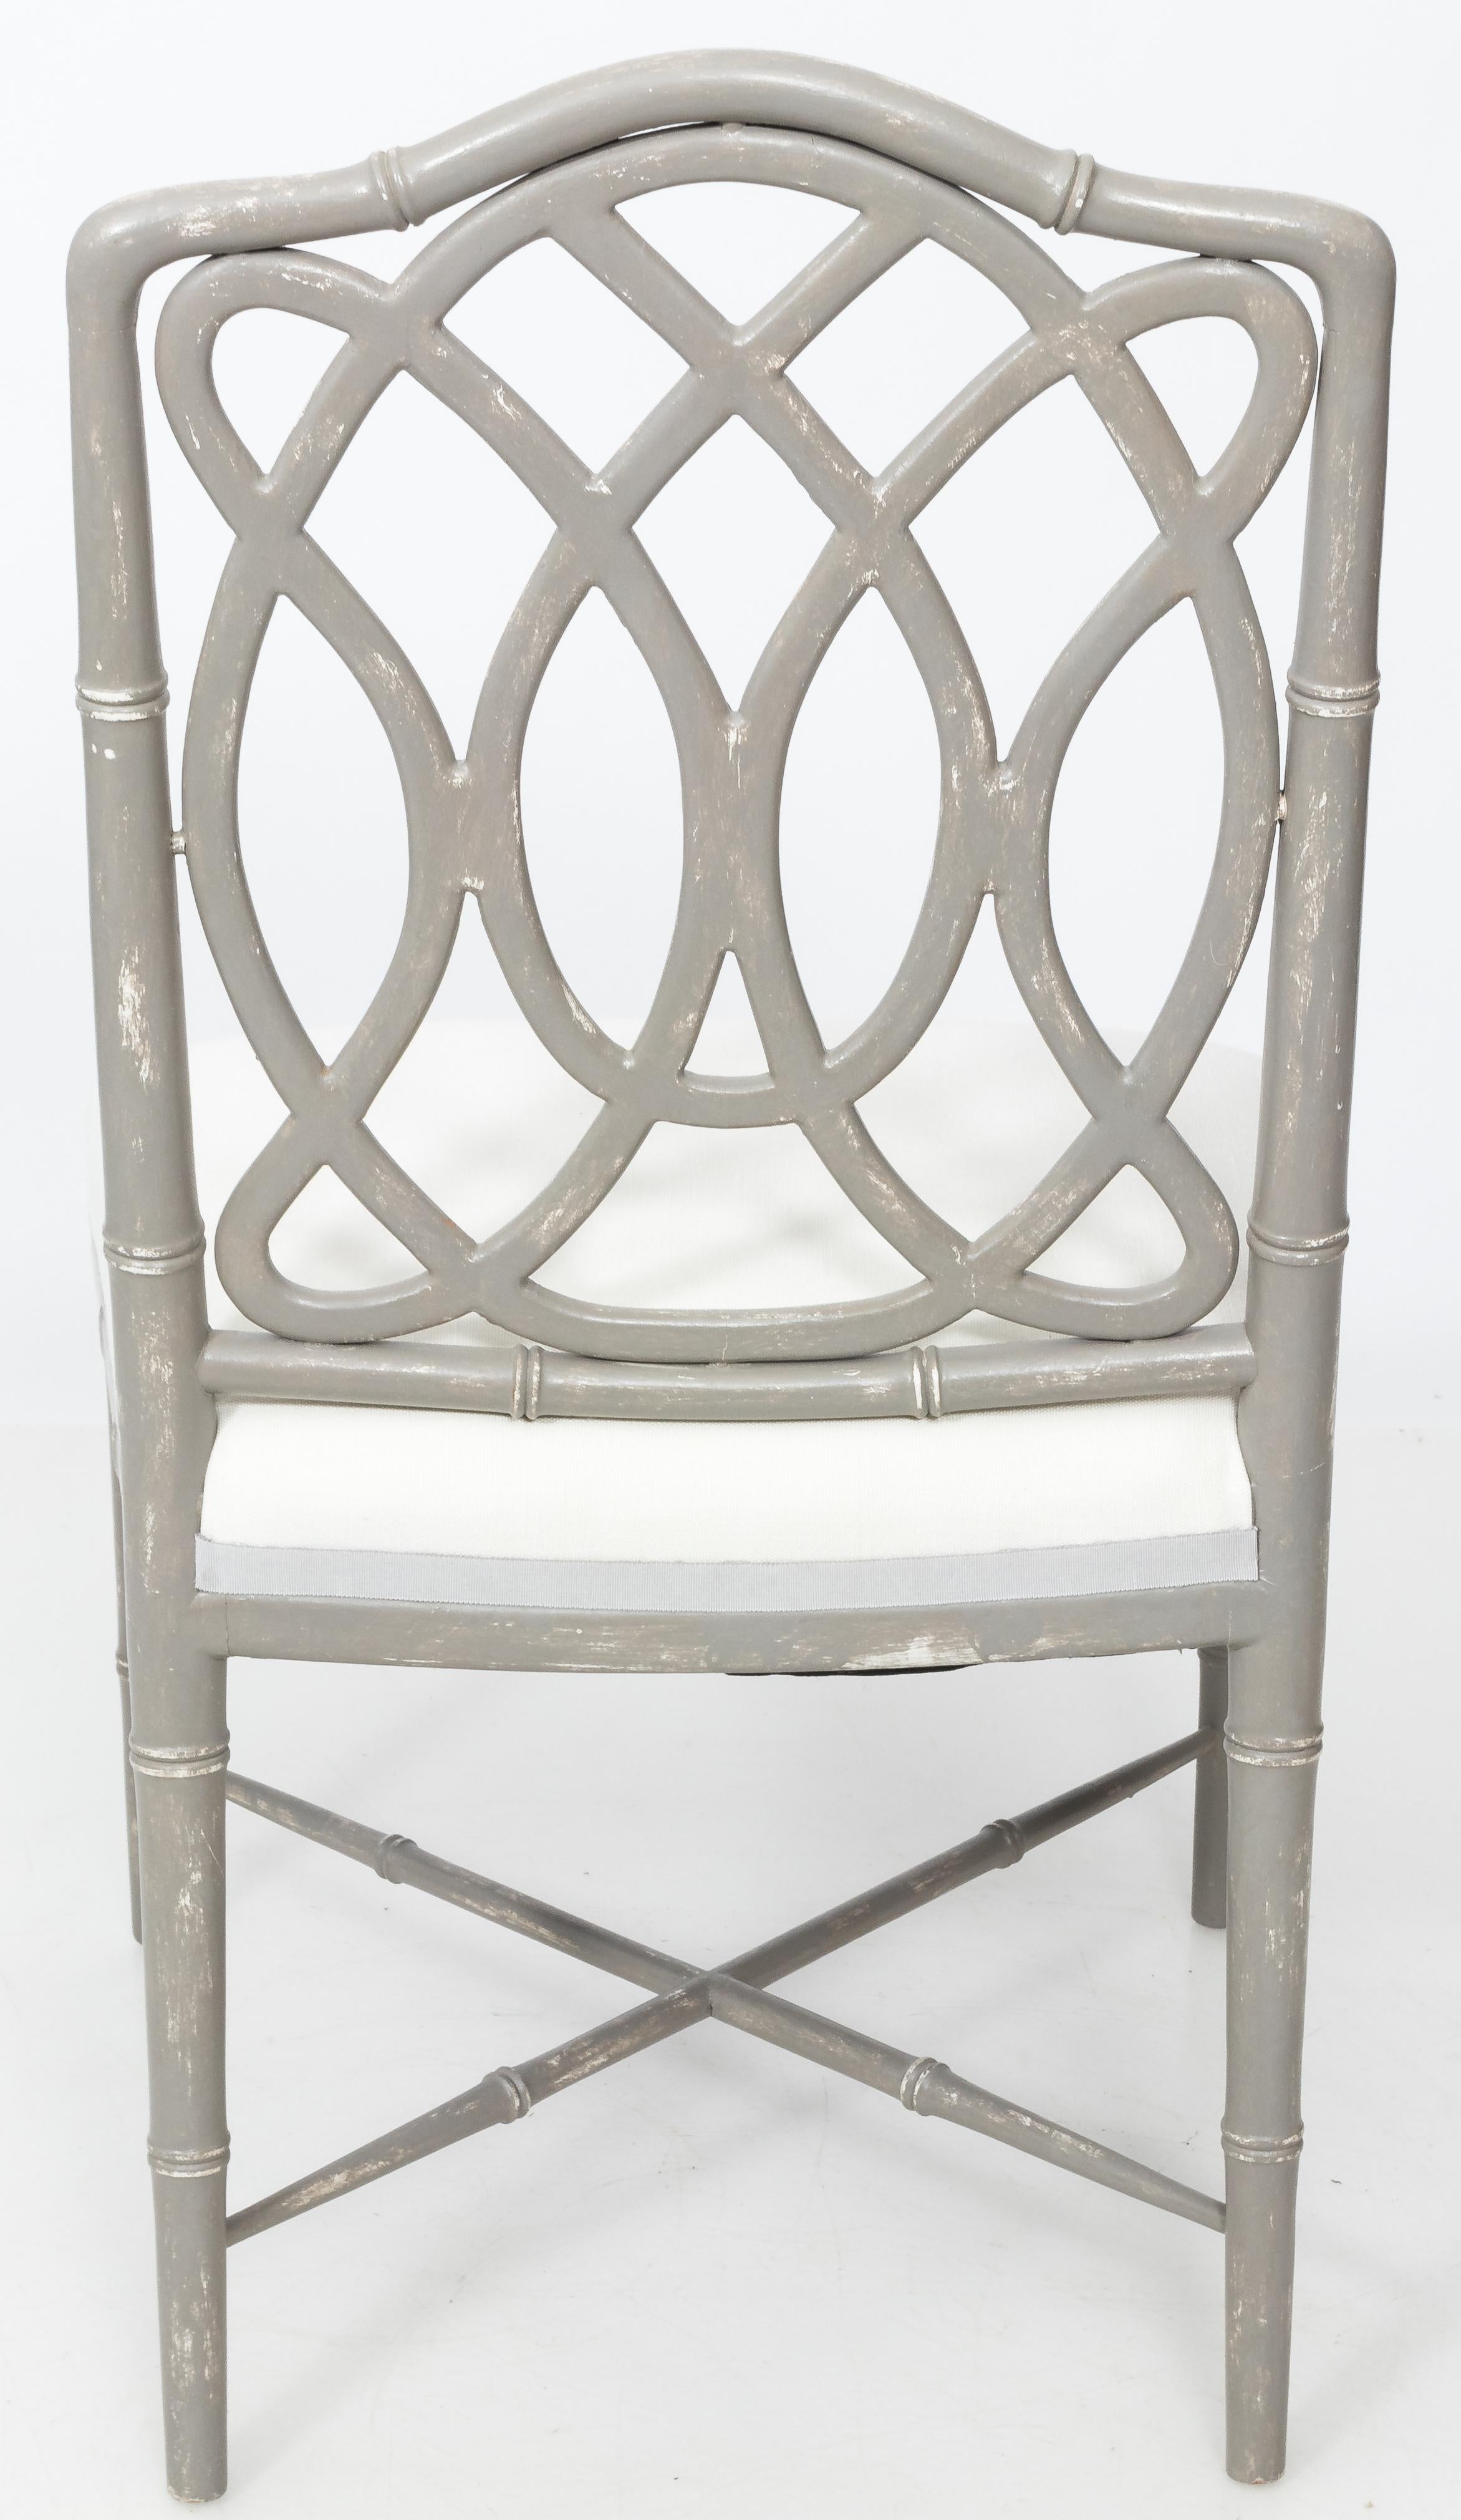 Faux Bamboo Chinoiserie Gray Painted Dining Chairs, set of 4 In Good Condition For Sale In Stamford, CT